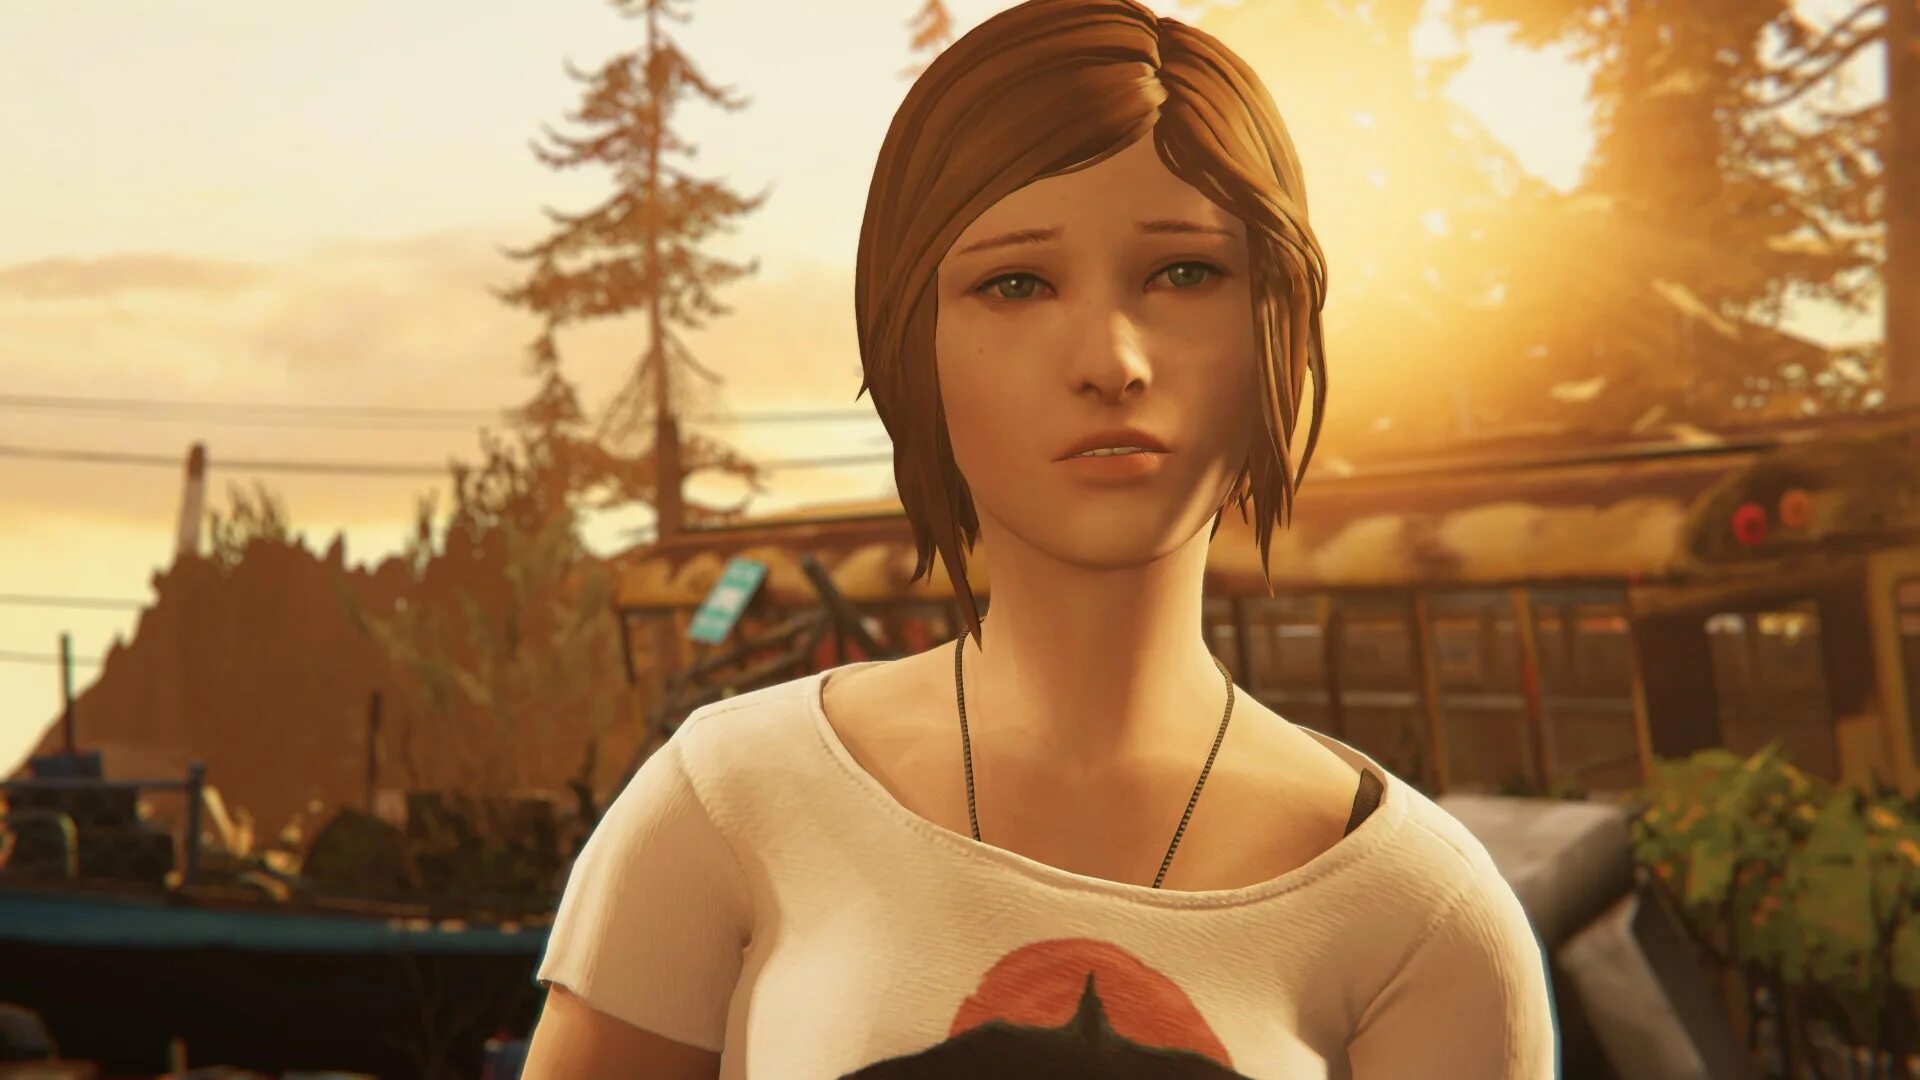 Life is serious. Life is Strange before the Storm ремастер. Life is Strange Remastered collection. Life is Strange before the Storm Remastered Скриншоты.